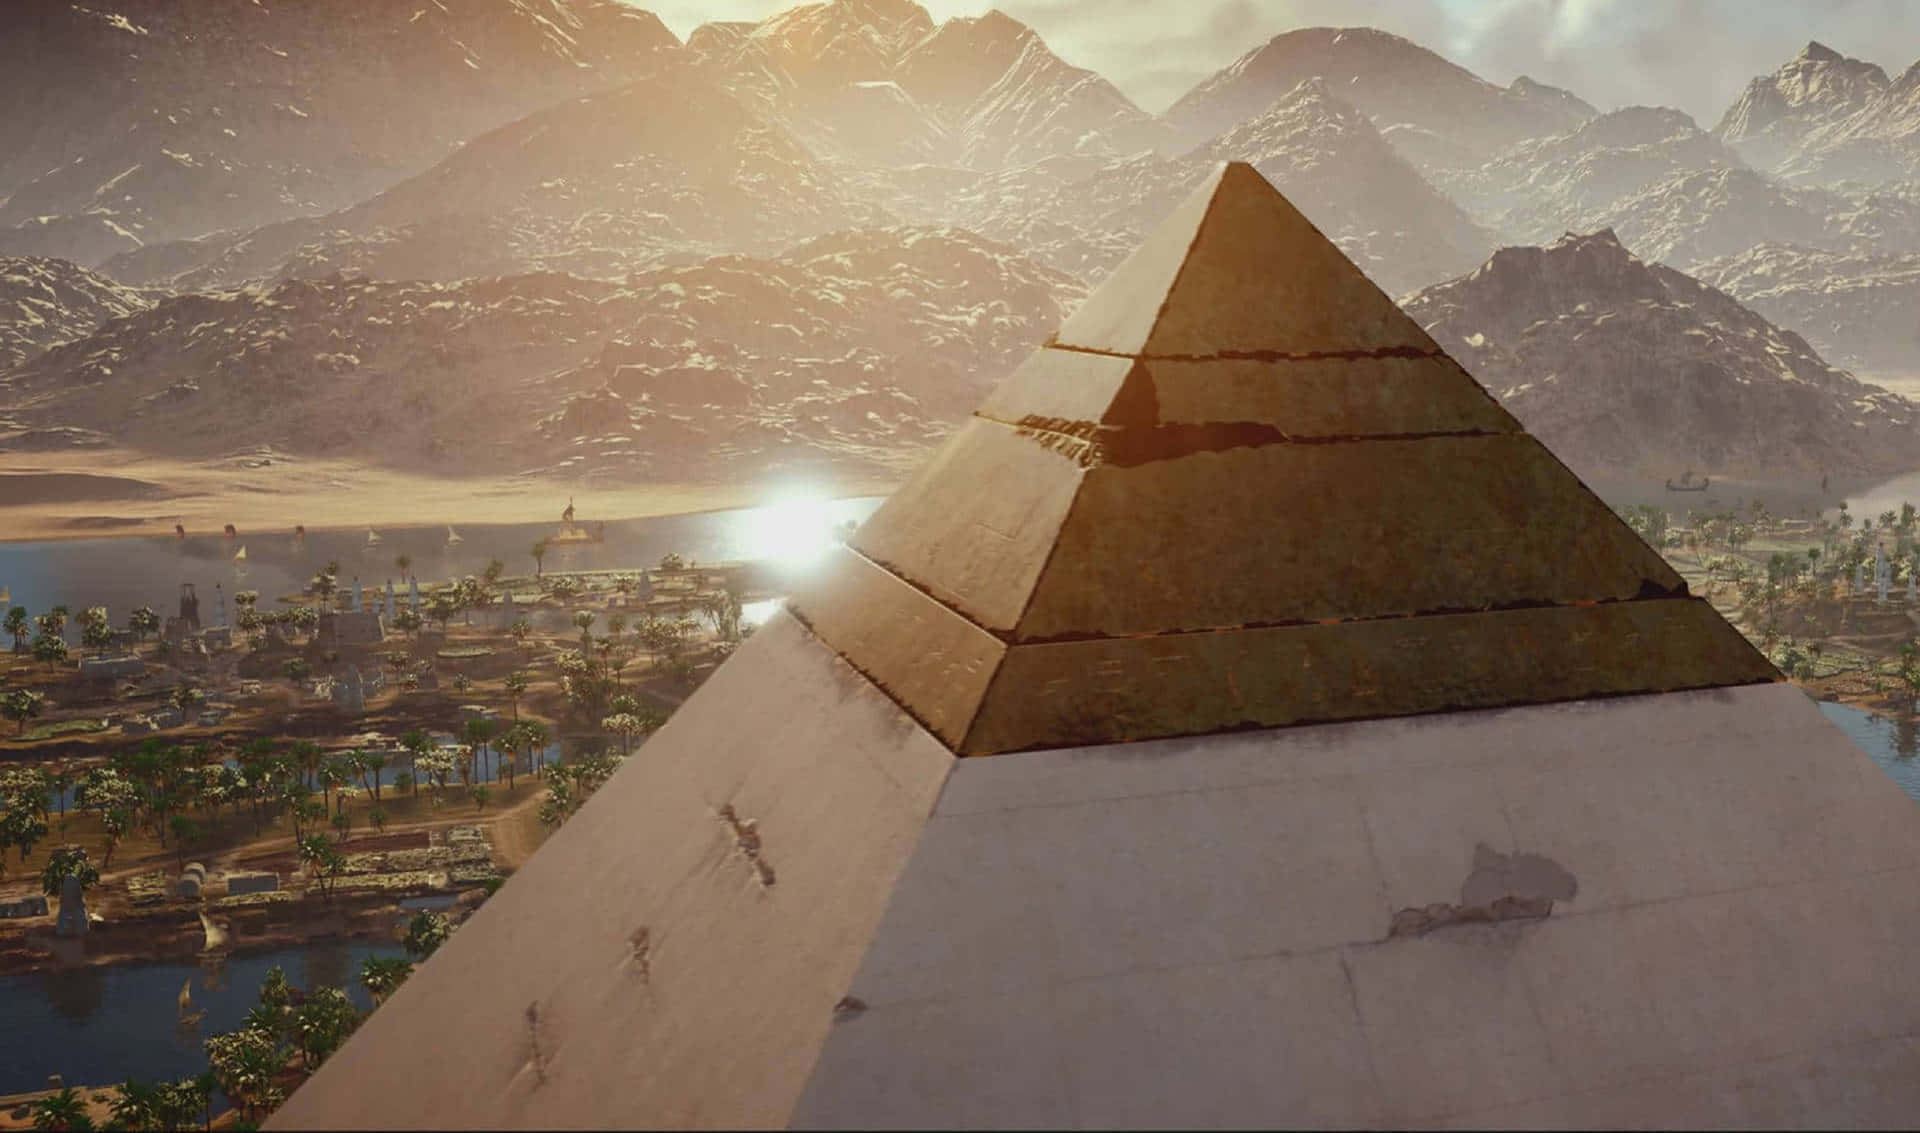 2440x1440 Assassin's Creed Odyssey Background Of The Great Pyramid